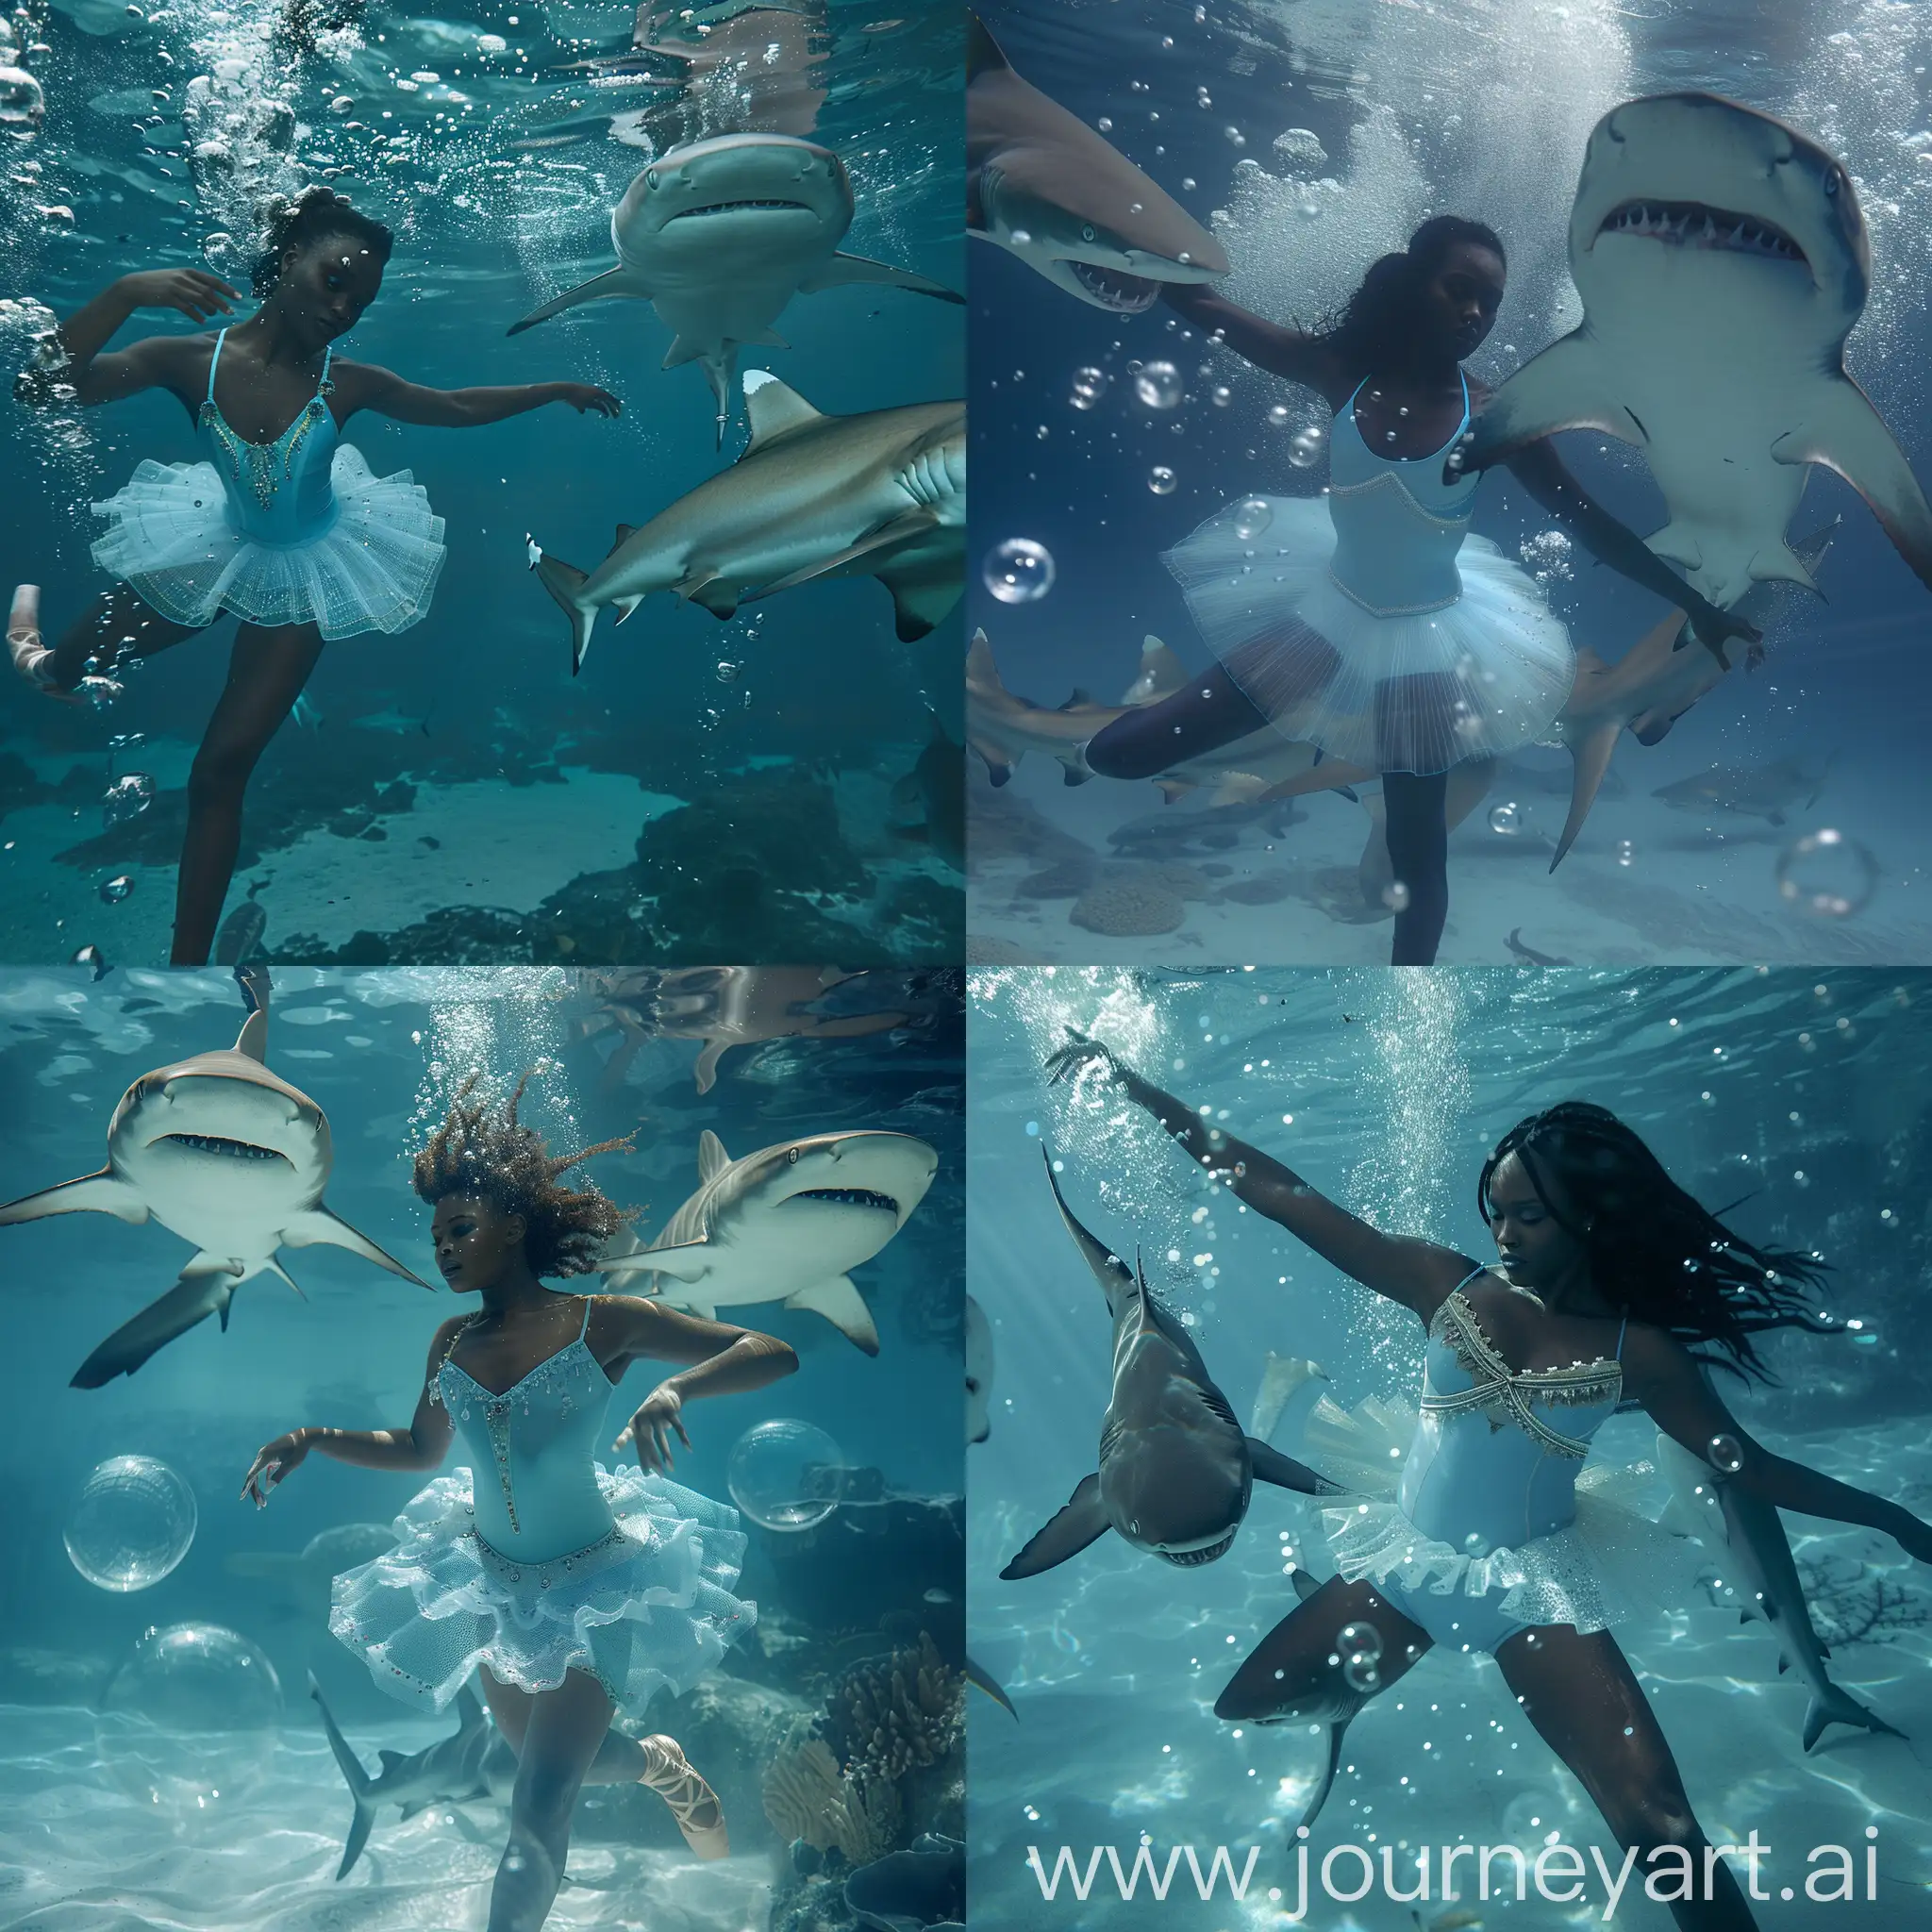 A captivating cinematic image of a black ballet dancer underwater in a baby-blue ballet outfit dancing, a few large bubbles, and two large sharks swimming next to her